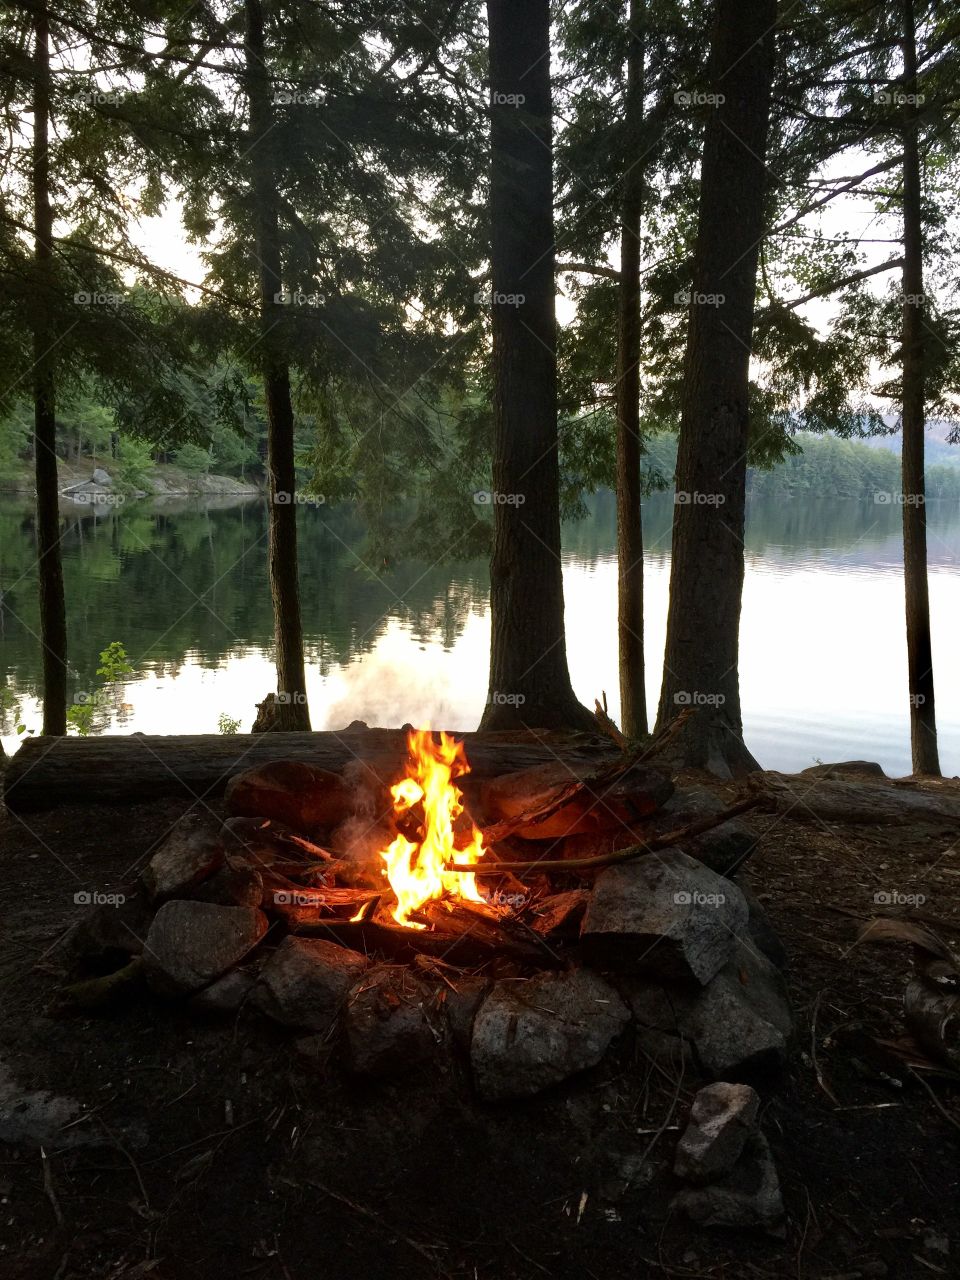 Quiet camp fire on Pharaoh Lake in the Adirondacks. You can hear the calls of Blue Herons in the background.